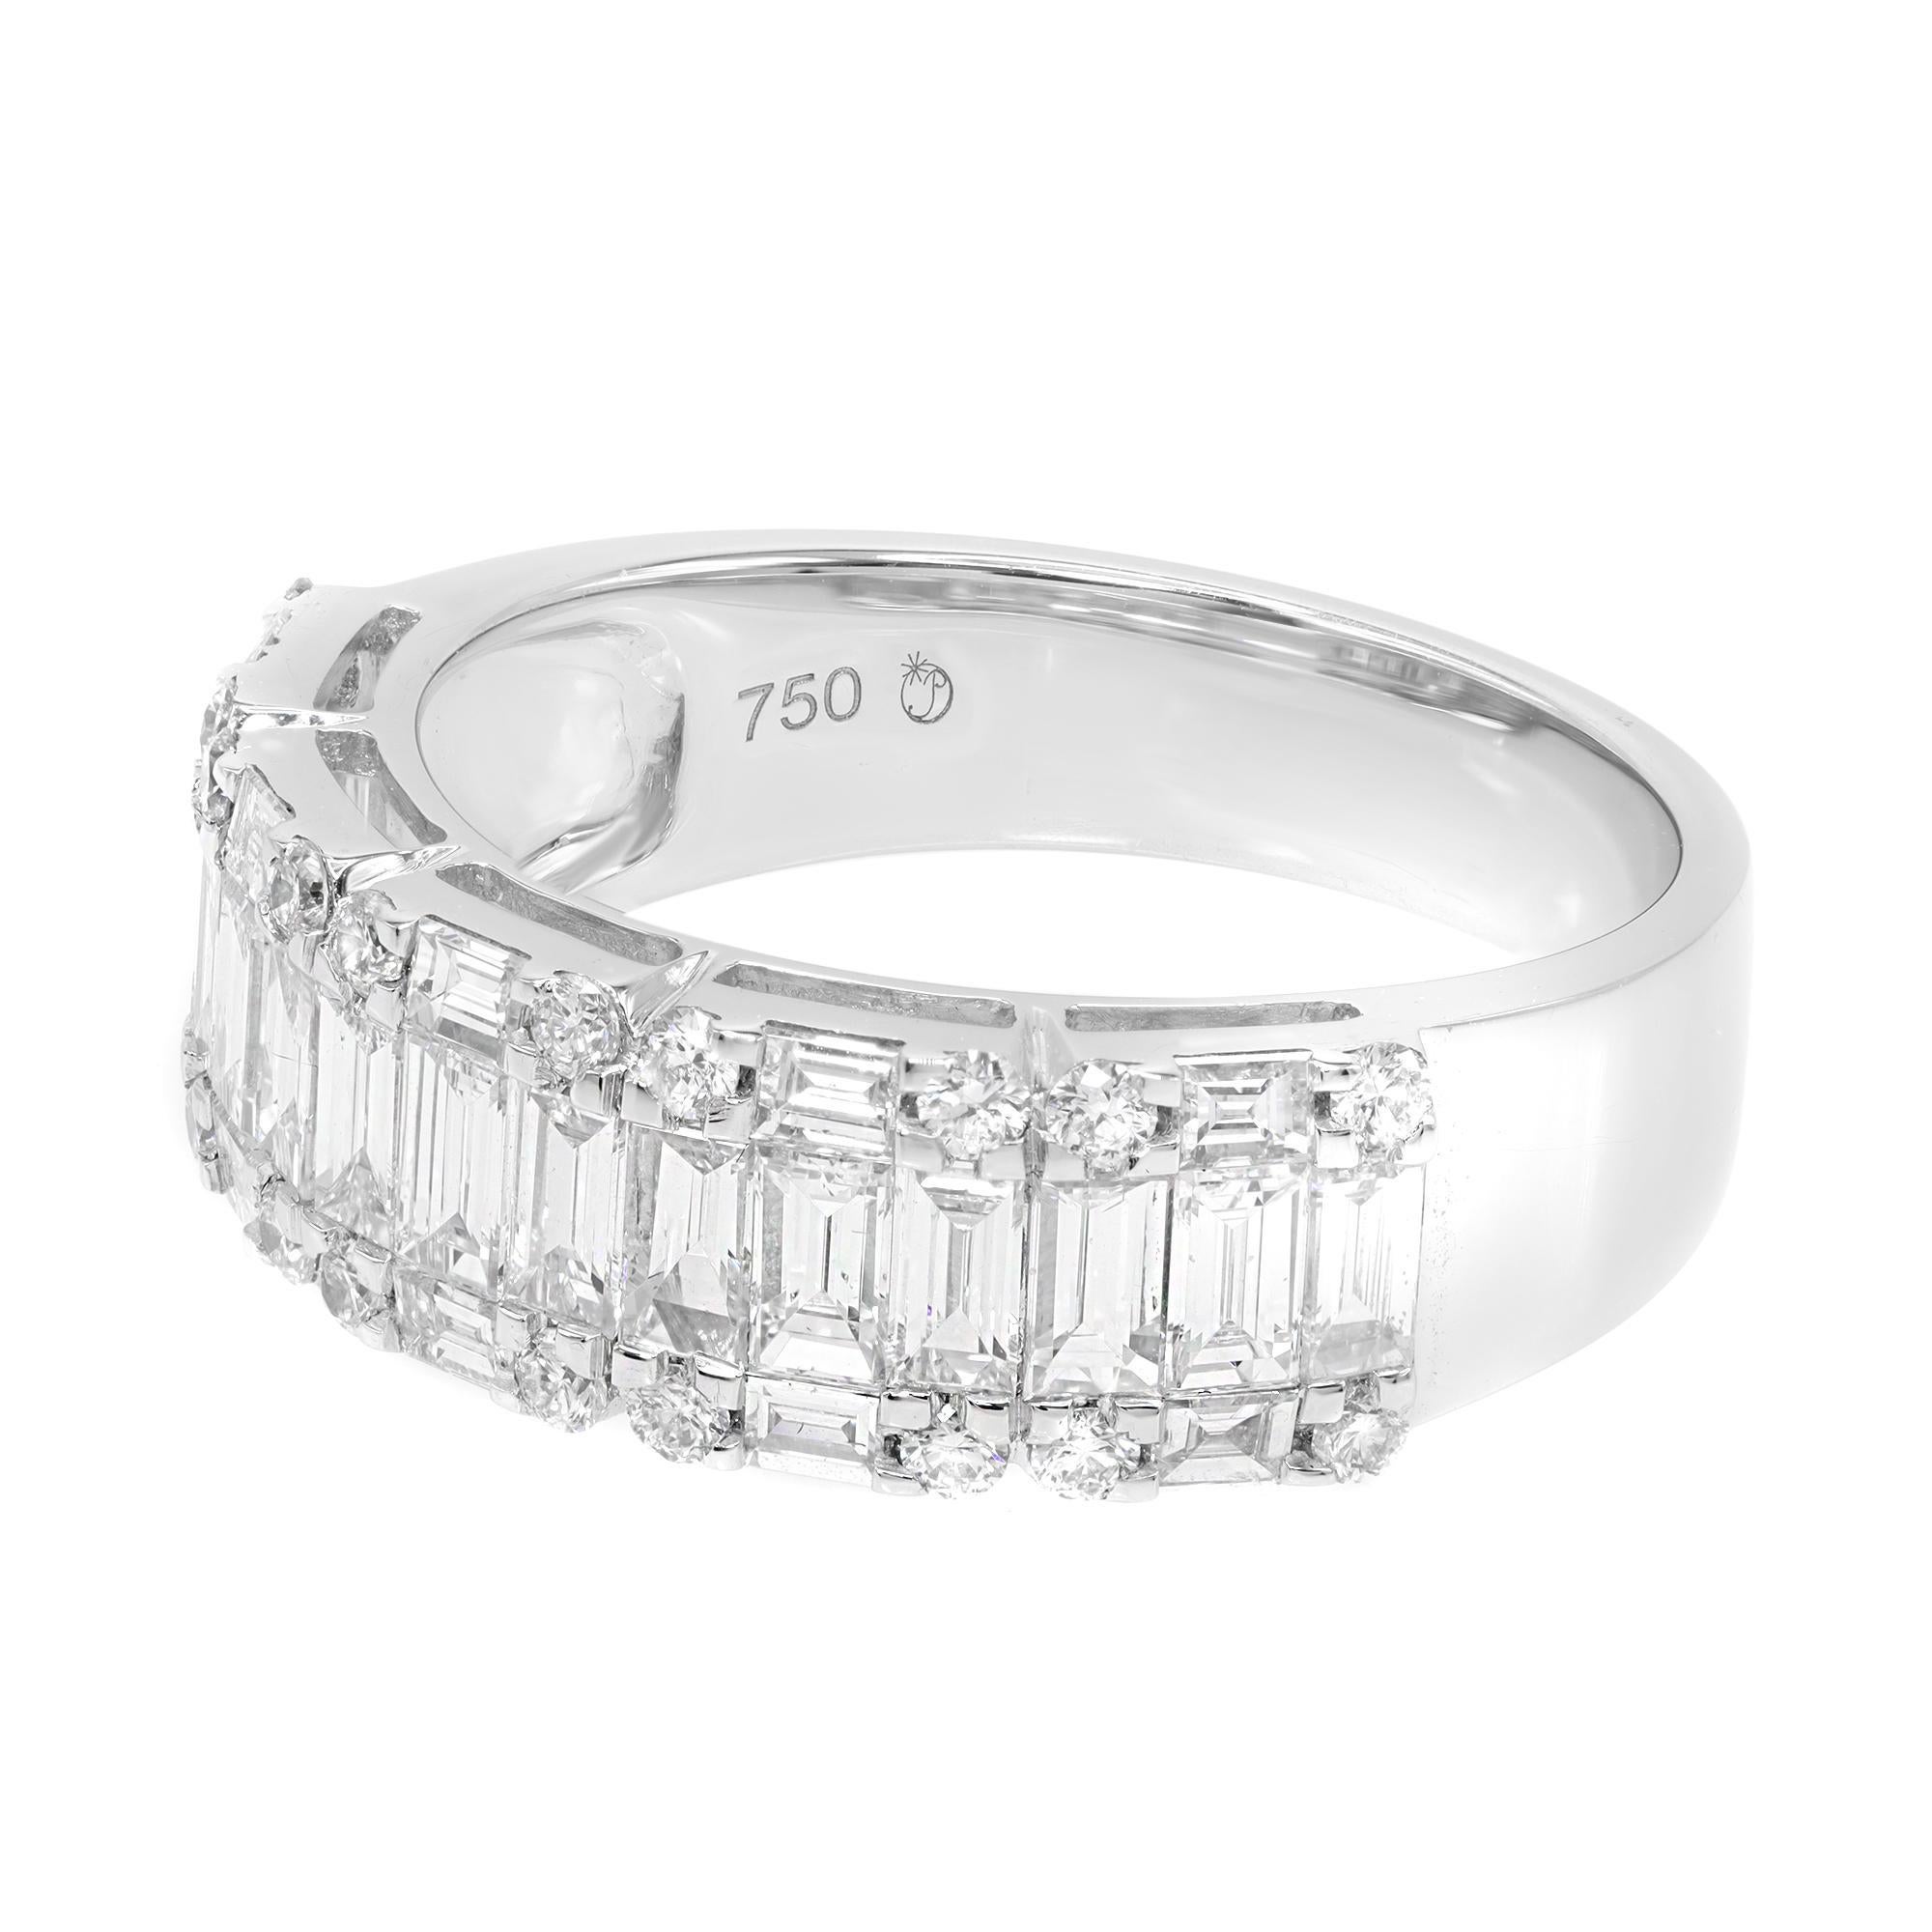 Beautiful Rachel Koen wide diamond wedding band ring featuring round and marquise cut diamonds set in round shape giving an illusion of a bigger stone. This stunning timeless band is crafted in 18k white gold. The total diamond carat weight is 1.90